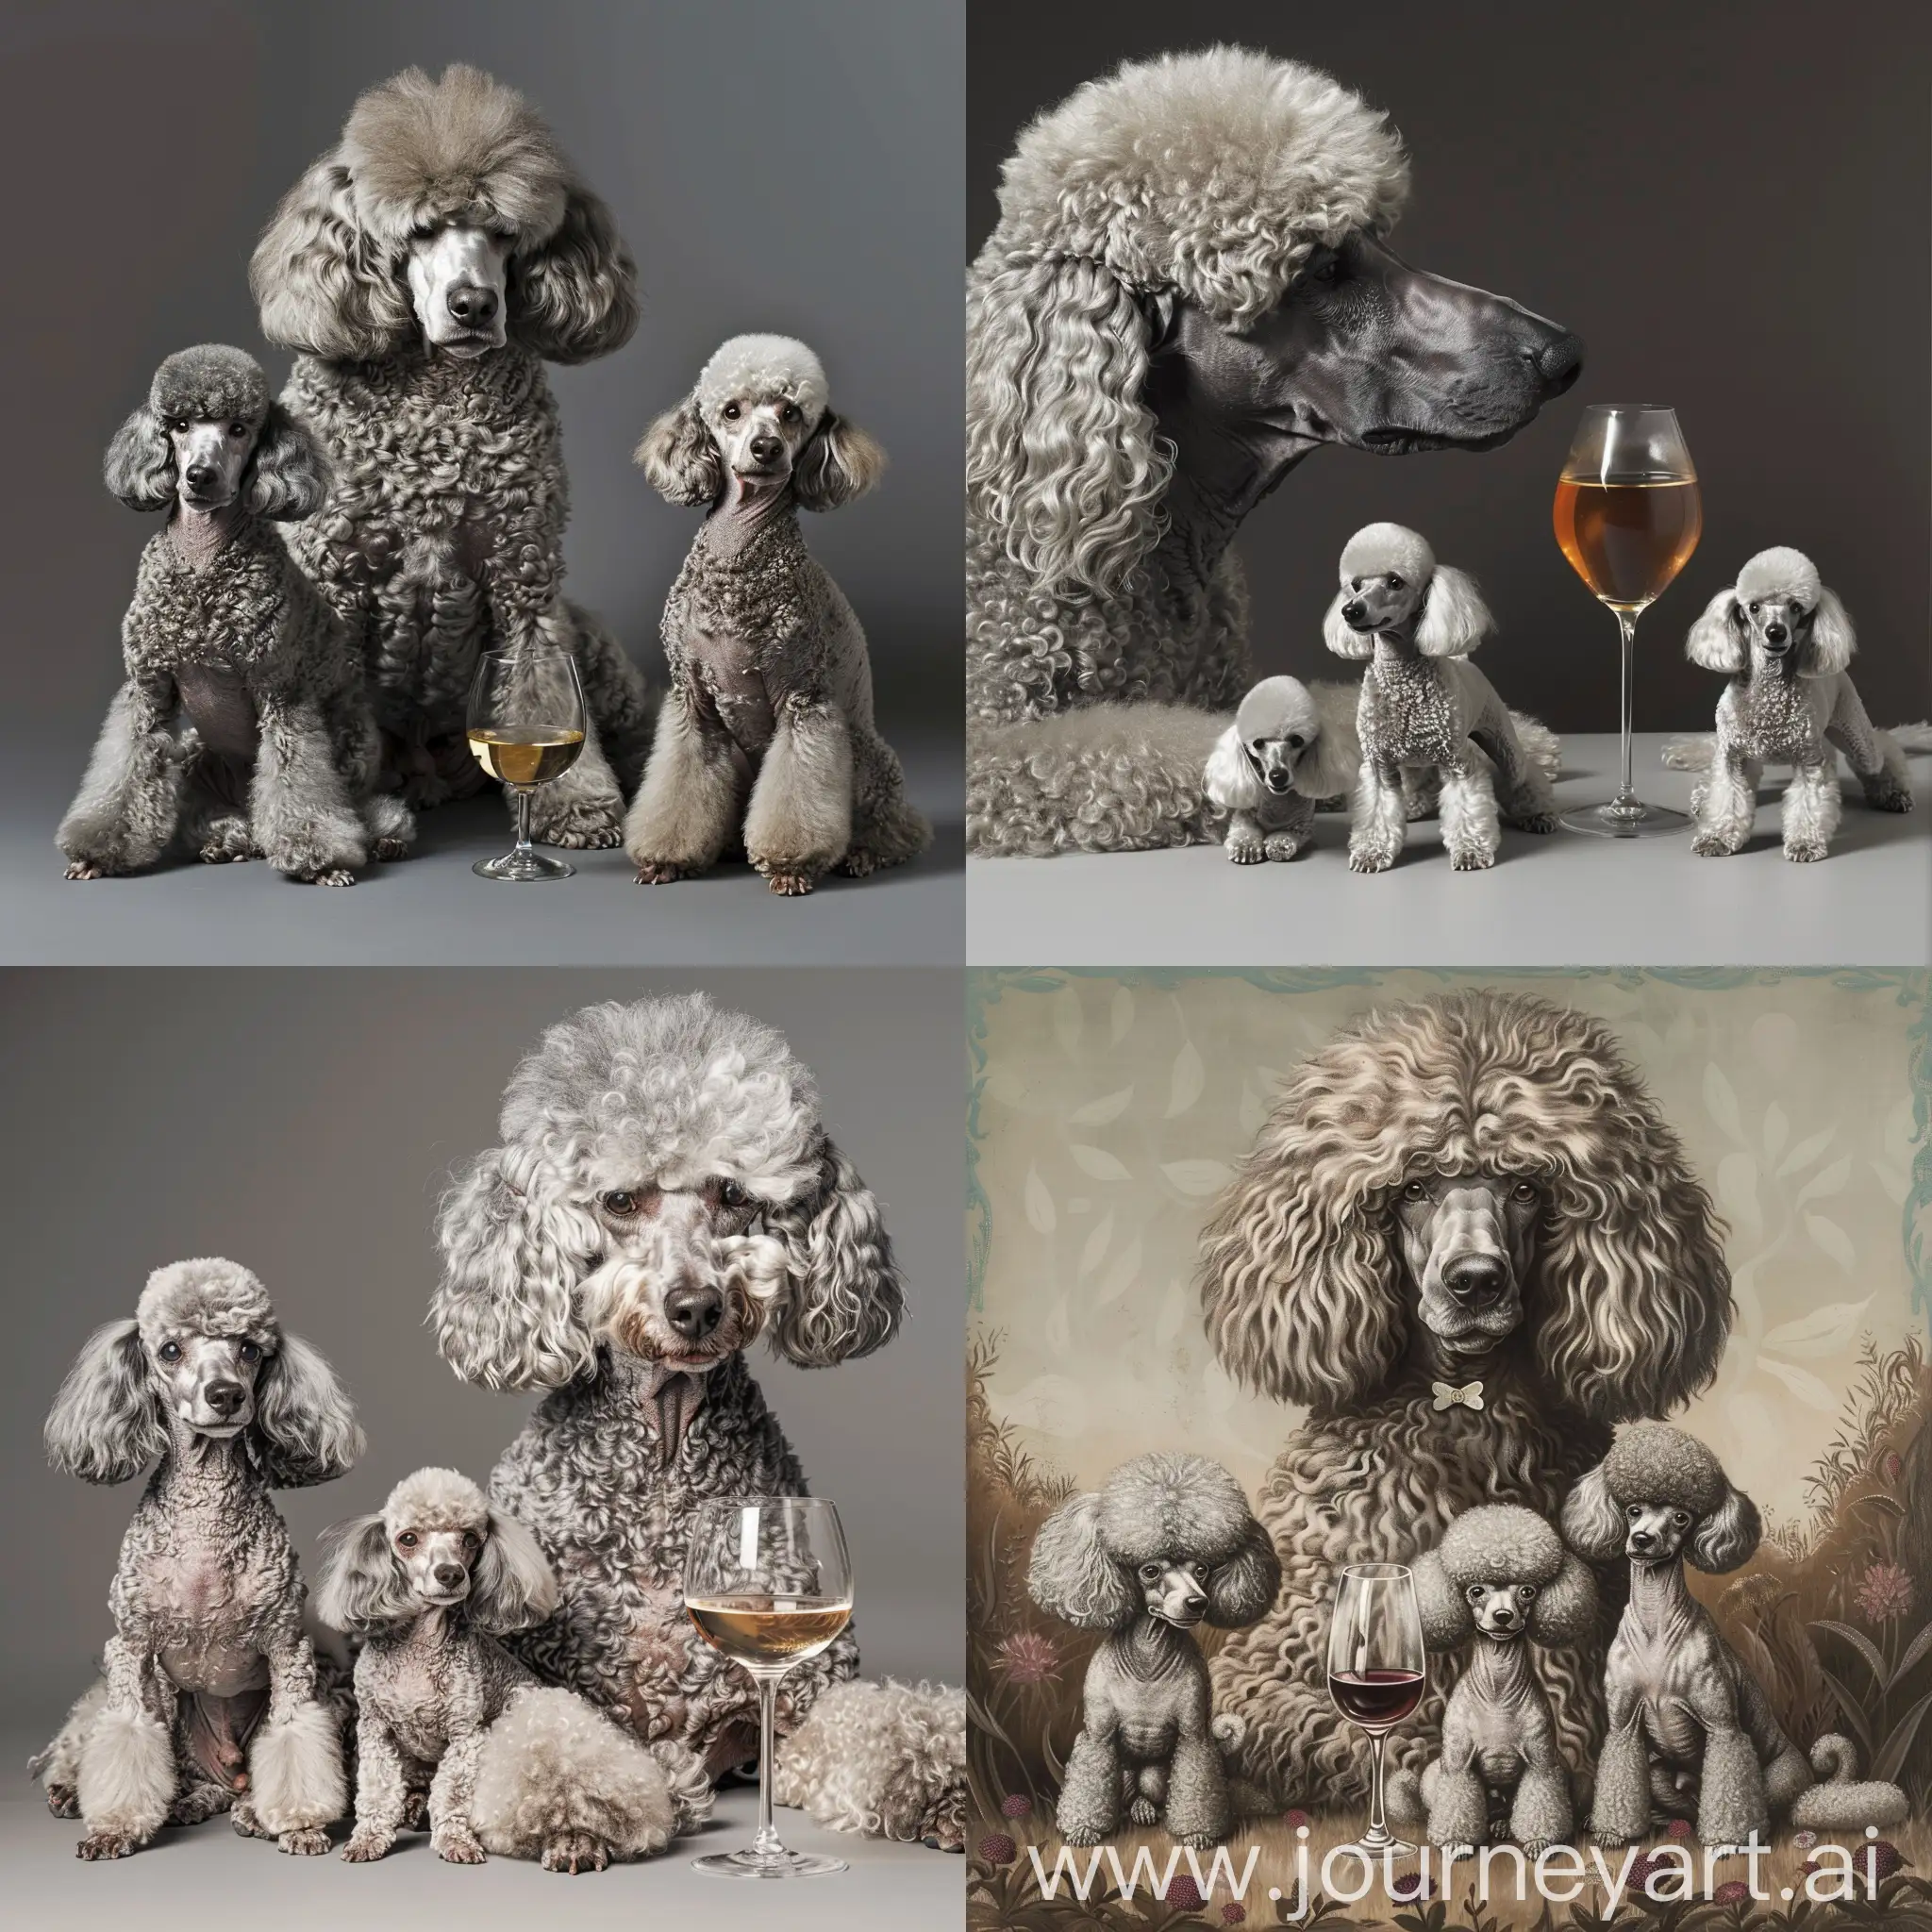 Three miniature silver poodles  and a big silver poodle with a glass of wine